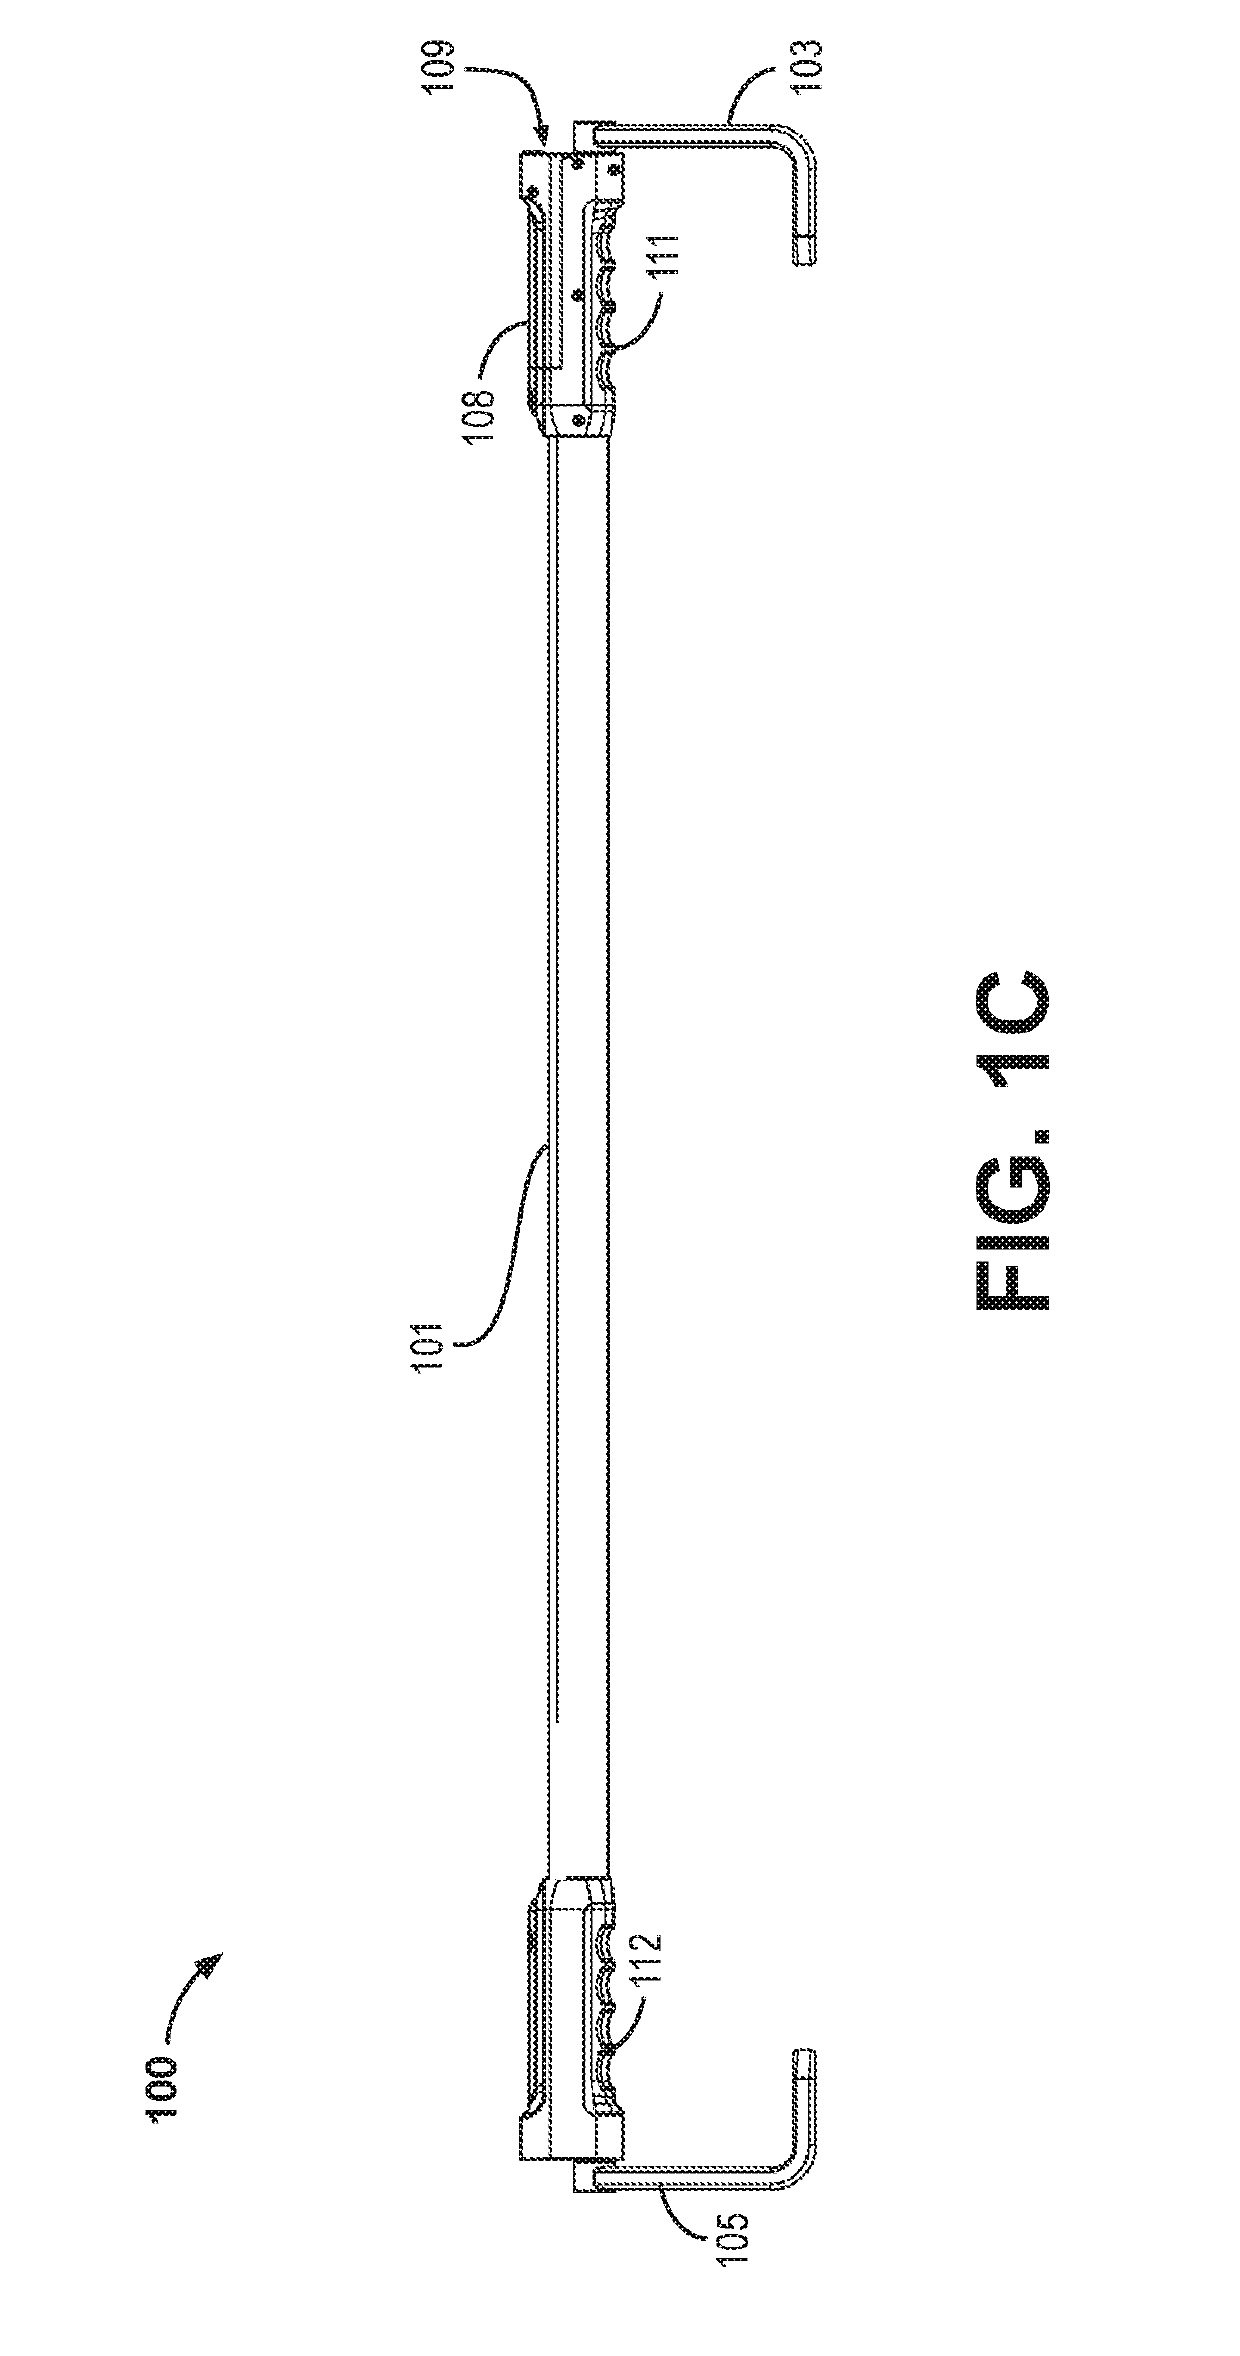 Multi-functional rechargeable lighting apparatus